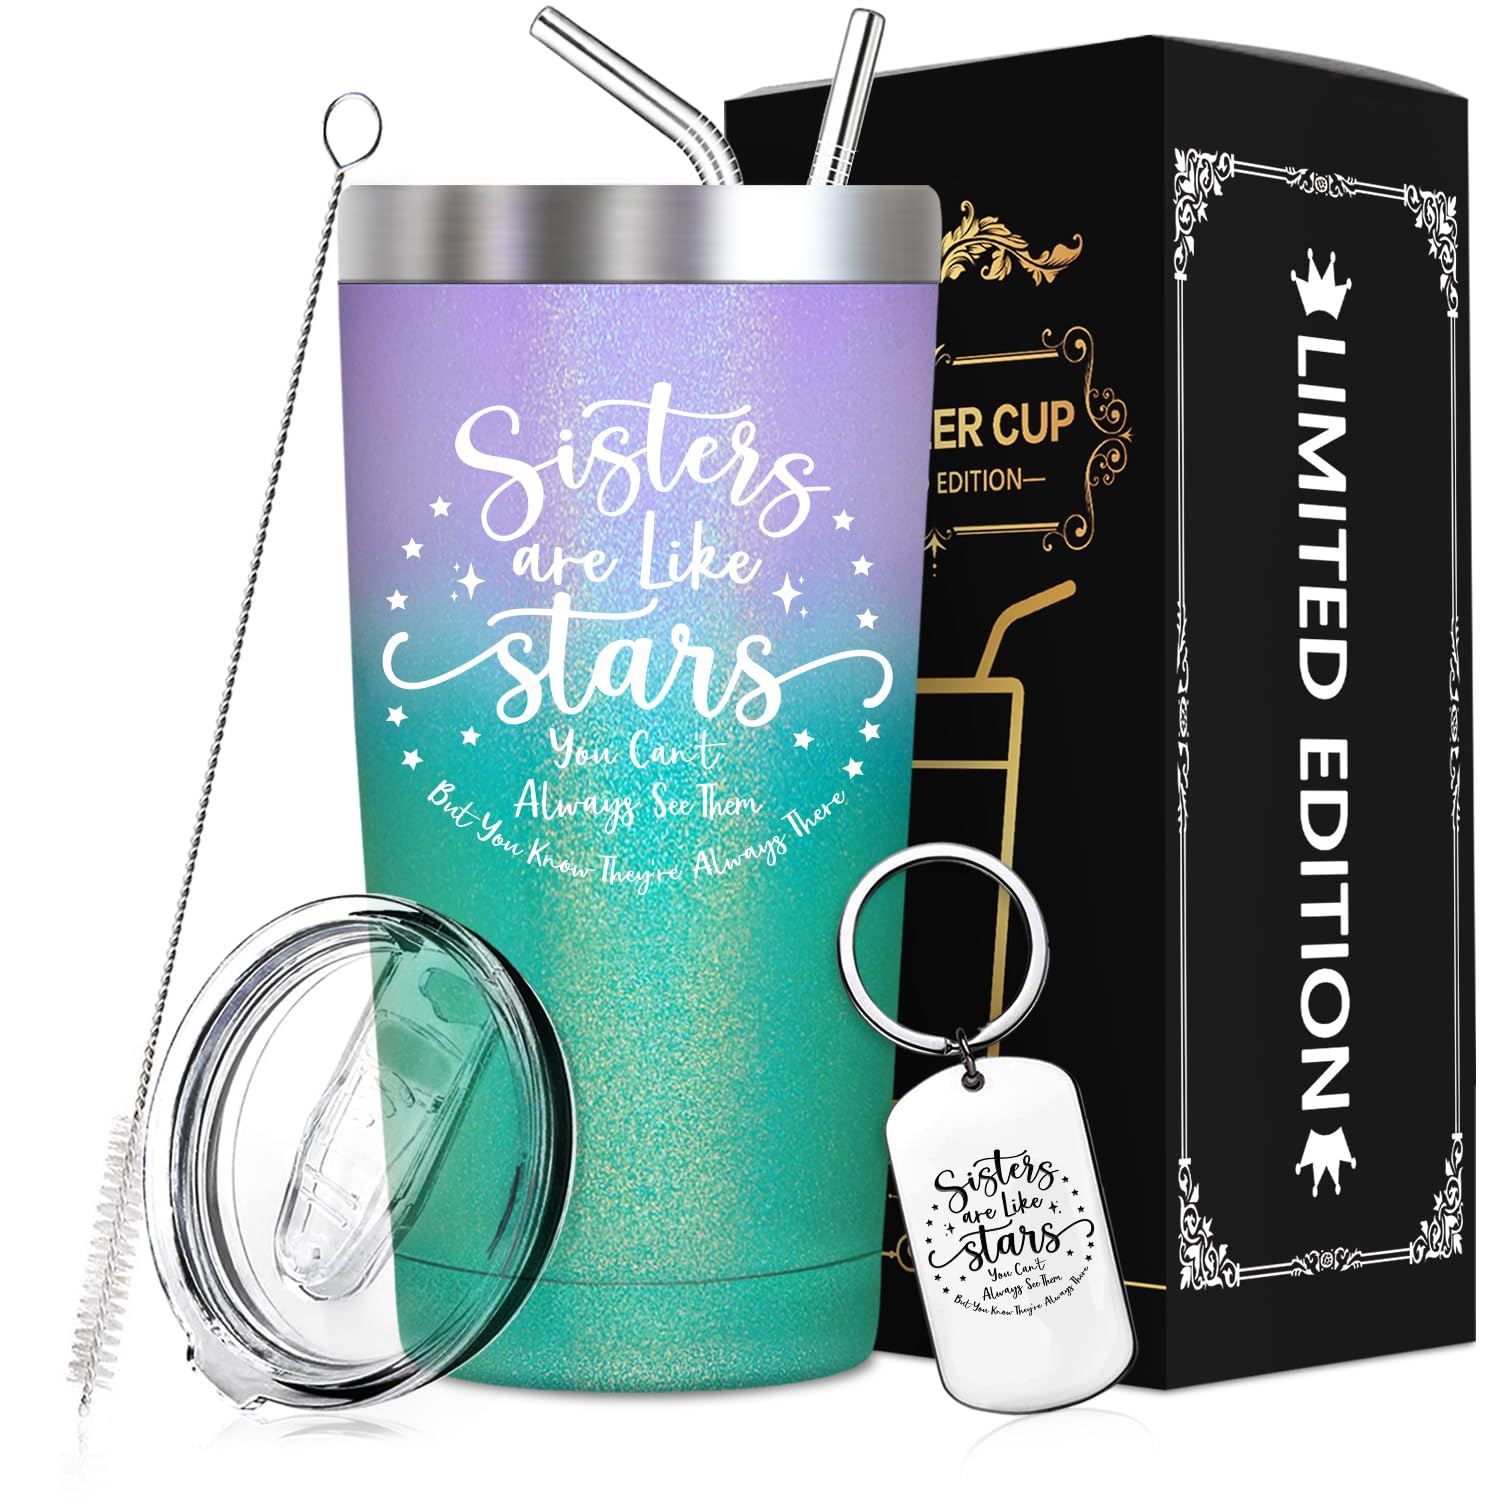 SpenMeta Sisters Gifts from Sister - Unique Gifts for Sister, Funny Sister Birthday Gifts from Sister, Little Sister, Big Sister Present Ideas Christmas Graduation Gift - Cup Tumbler